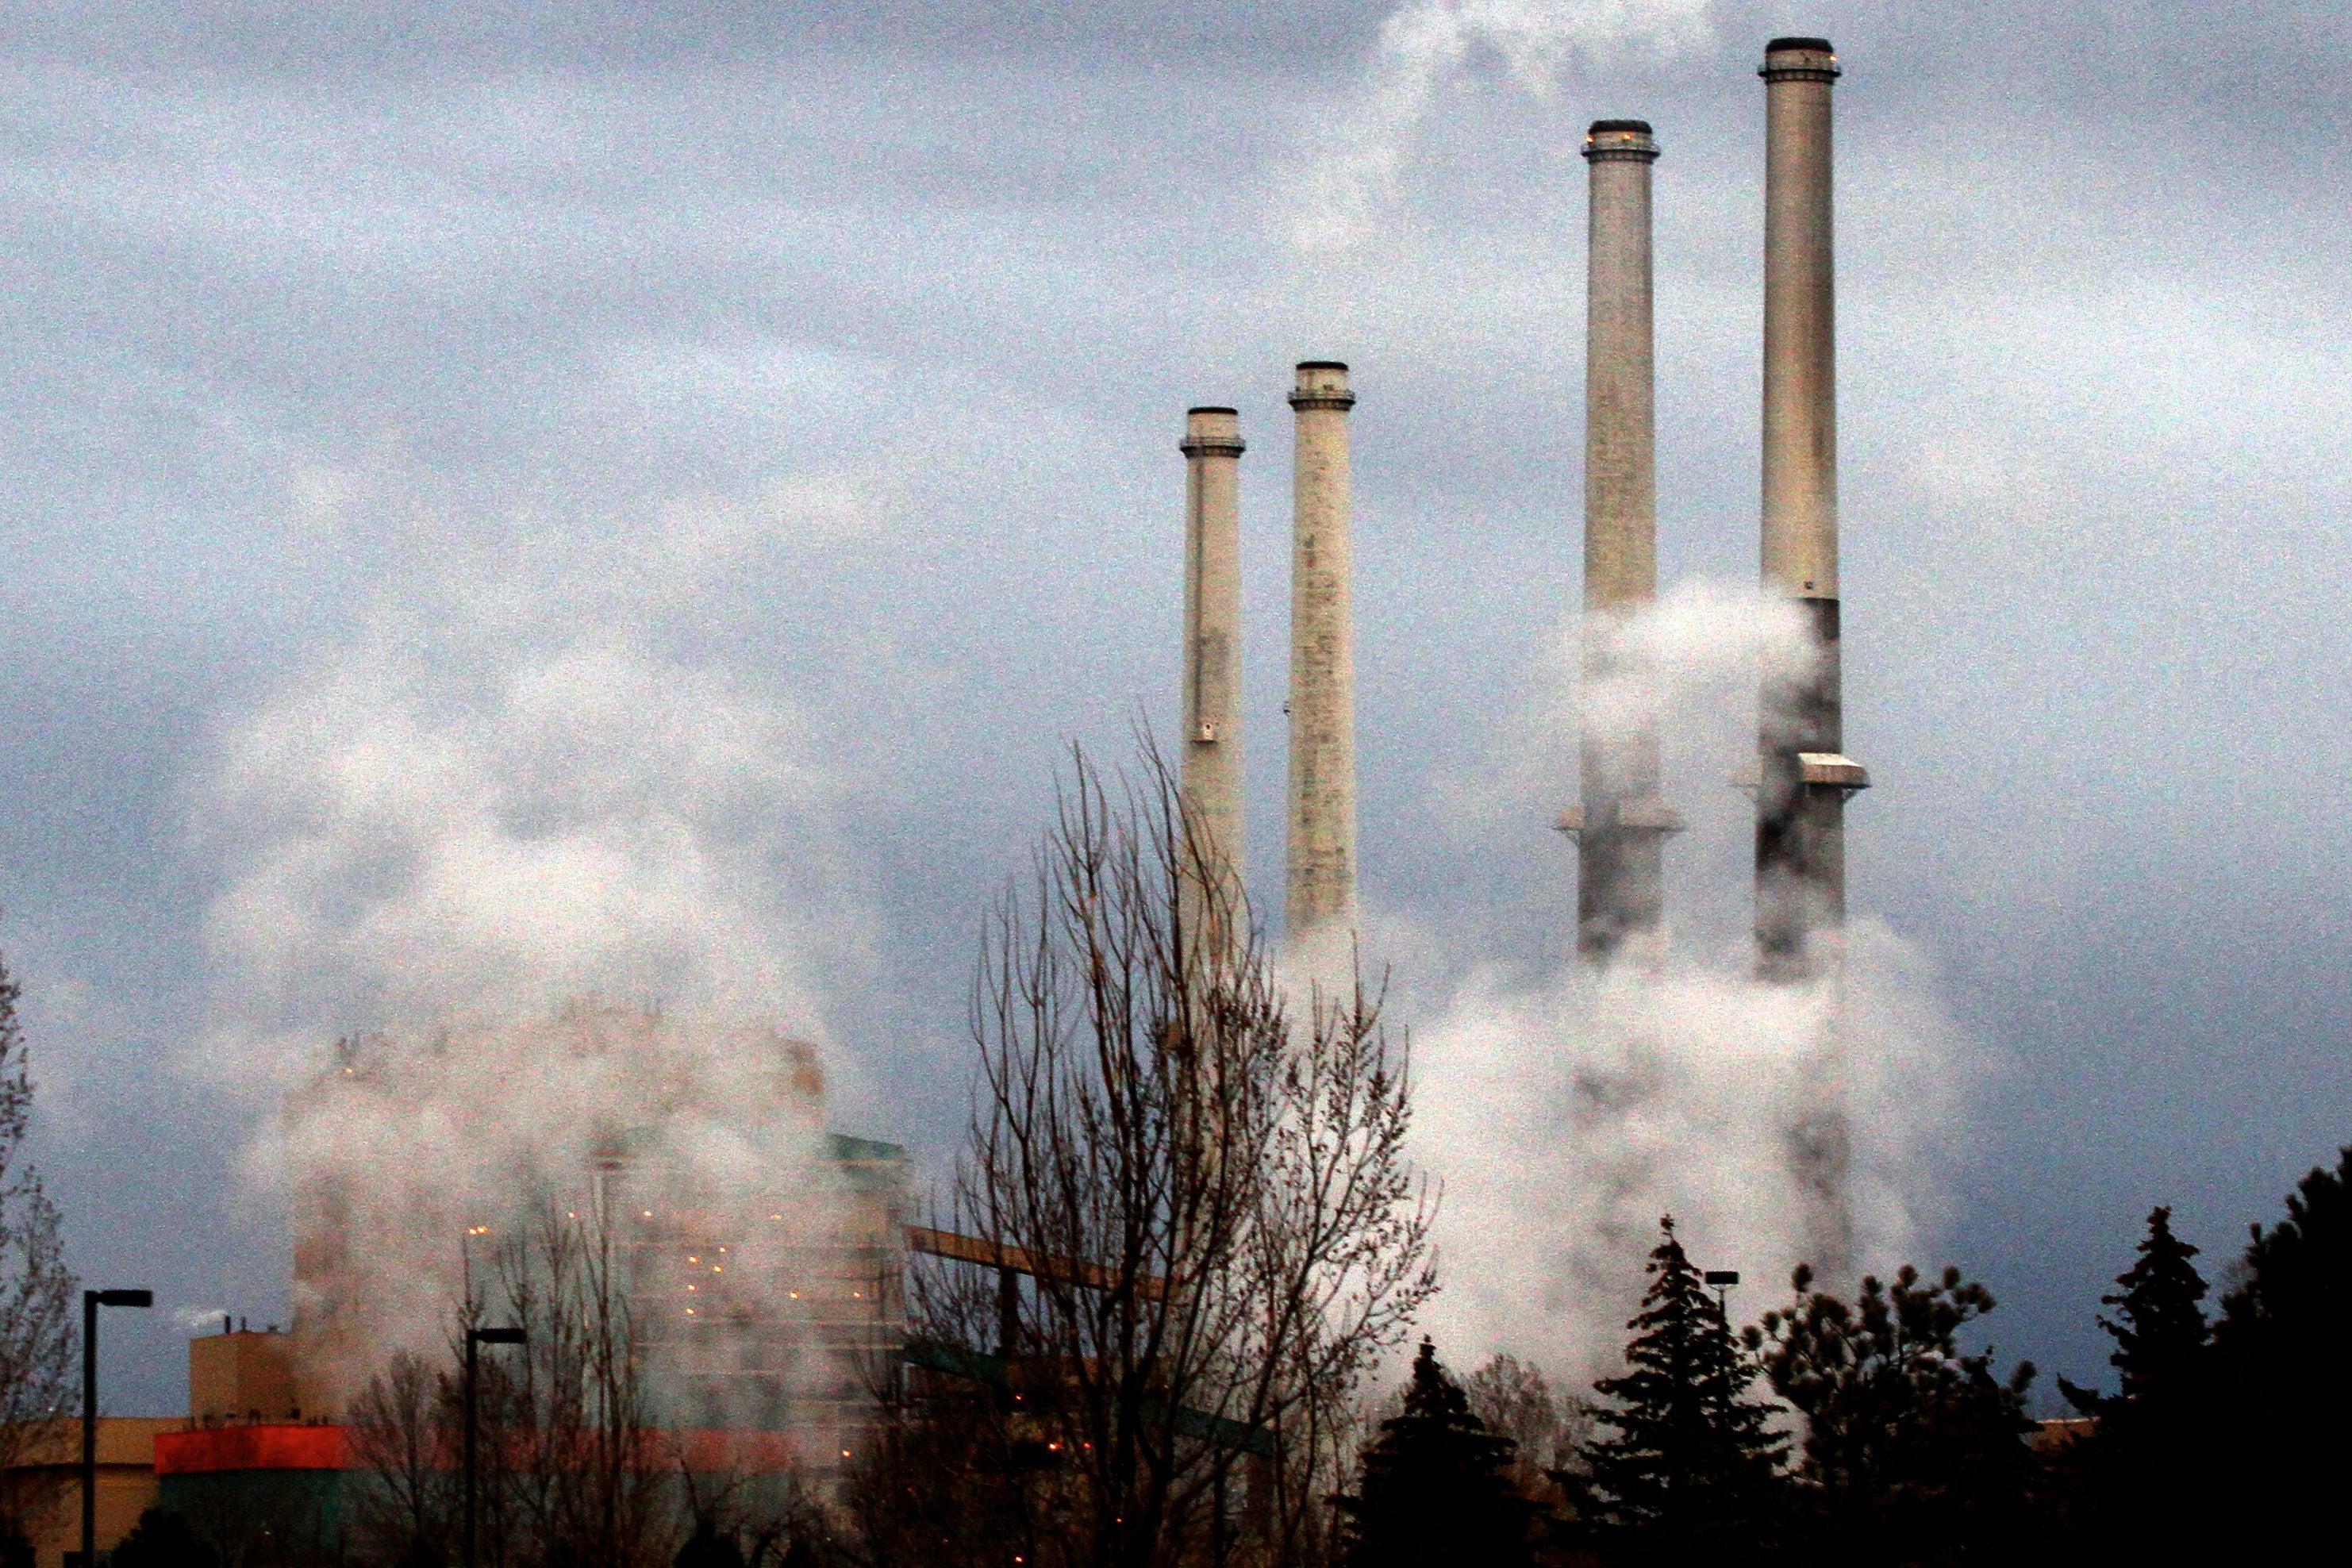 Coal-fired plant smokestacks spewing gases into the air